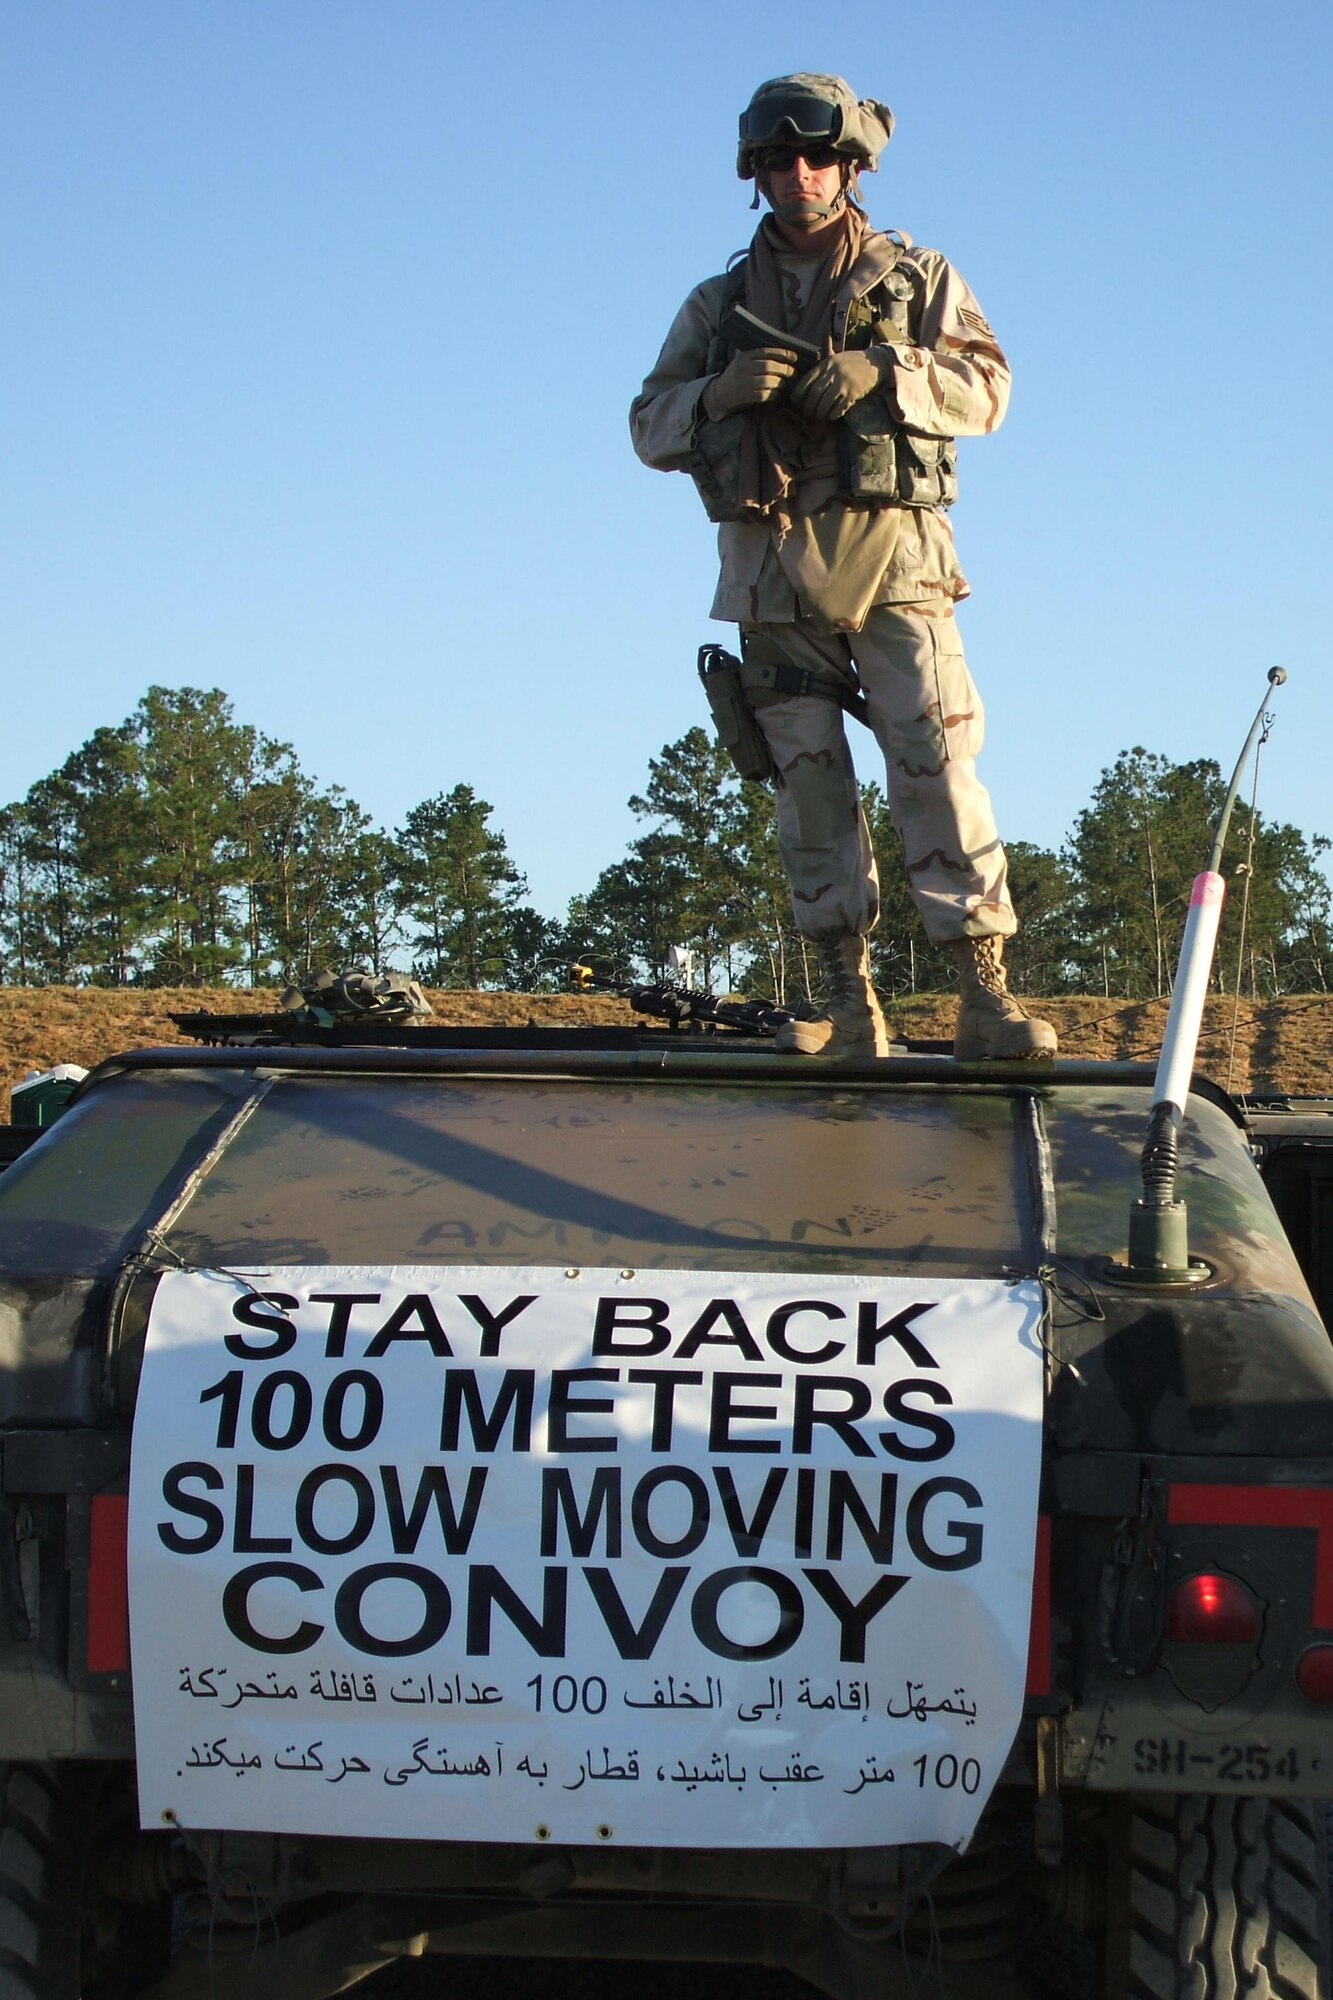 Staff Sergeant Kelly Summerfield, 90th Missile Maintenance Squadron, poses on top of a HMMVV used in convoy training at Camp Shelby, Miss. Sergeant Summerfield is deploying to Kandahar, Afghanistan.